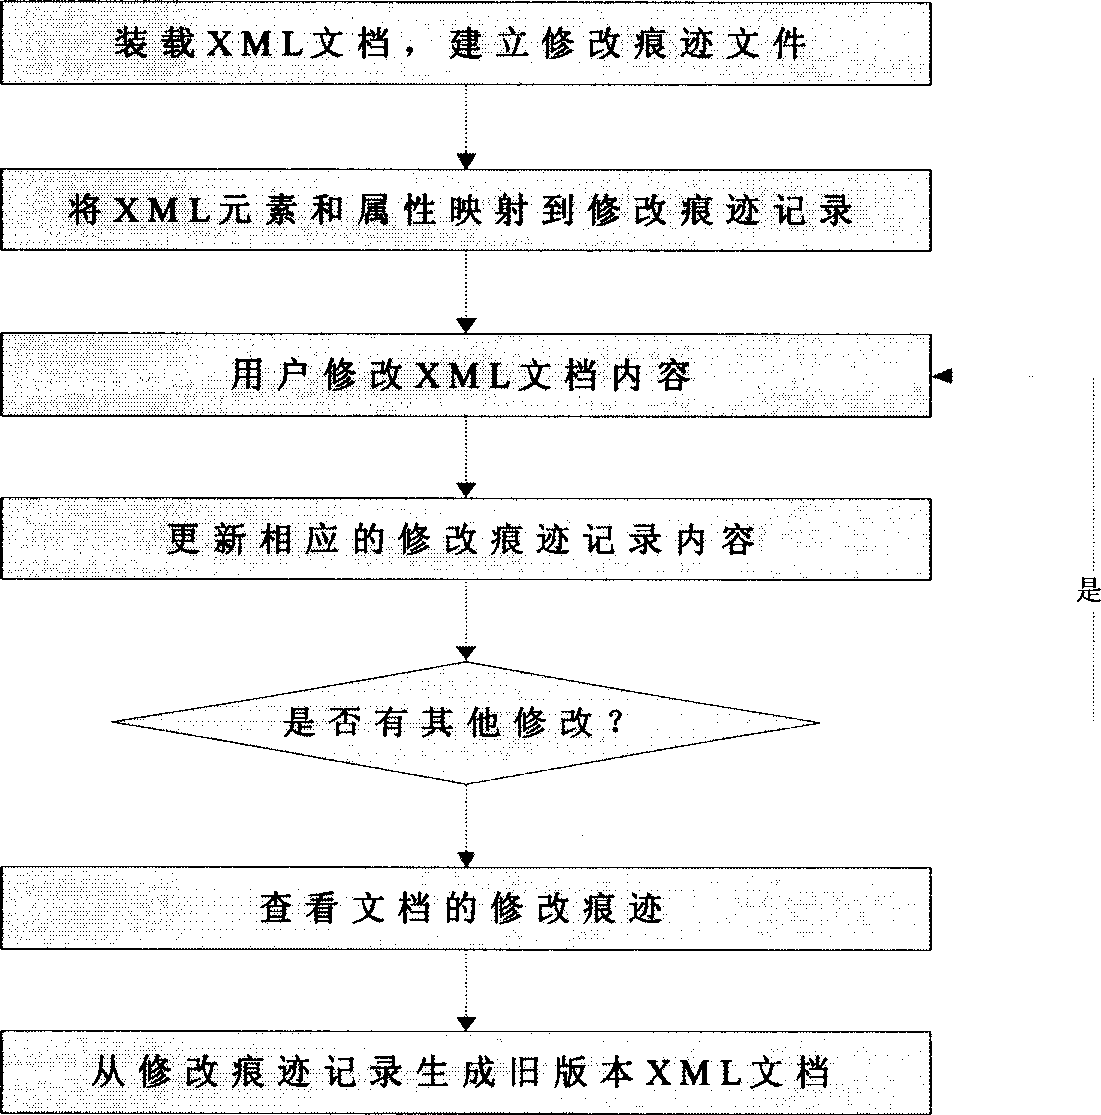 Recording method for extendable mark language file repairing trace